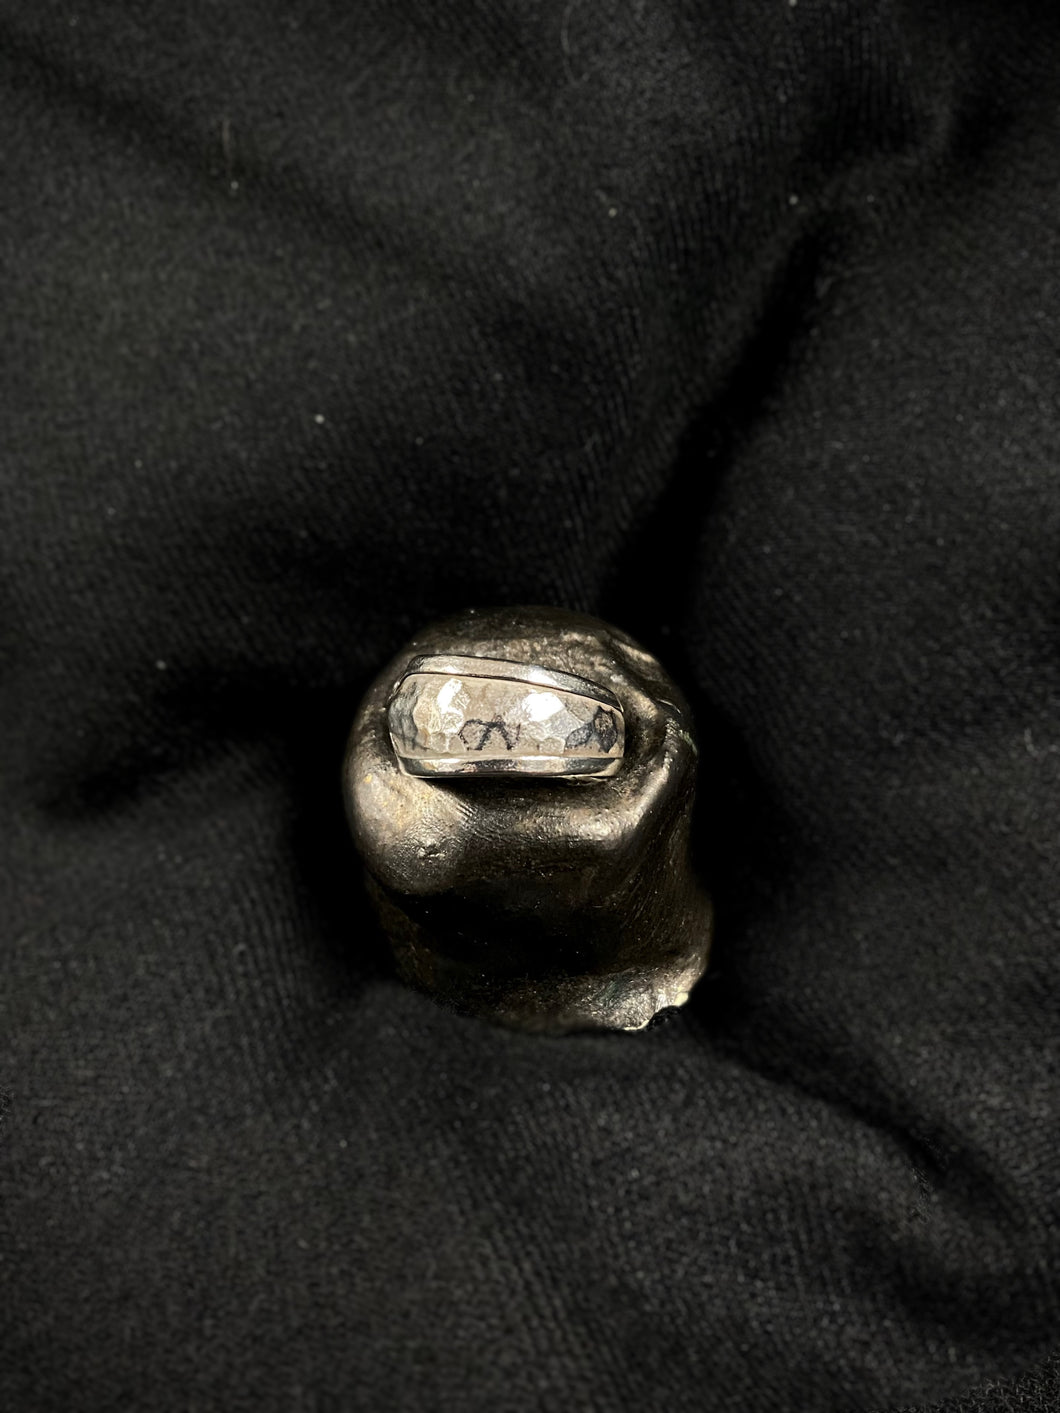 Diana Morrissey 999 Fine Silver Ring